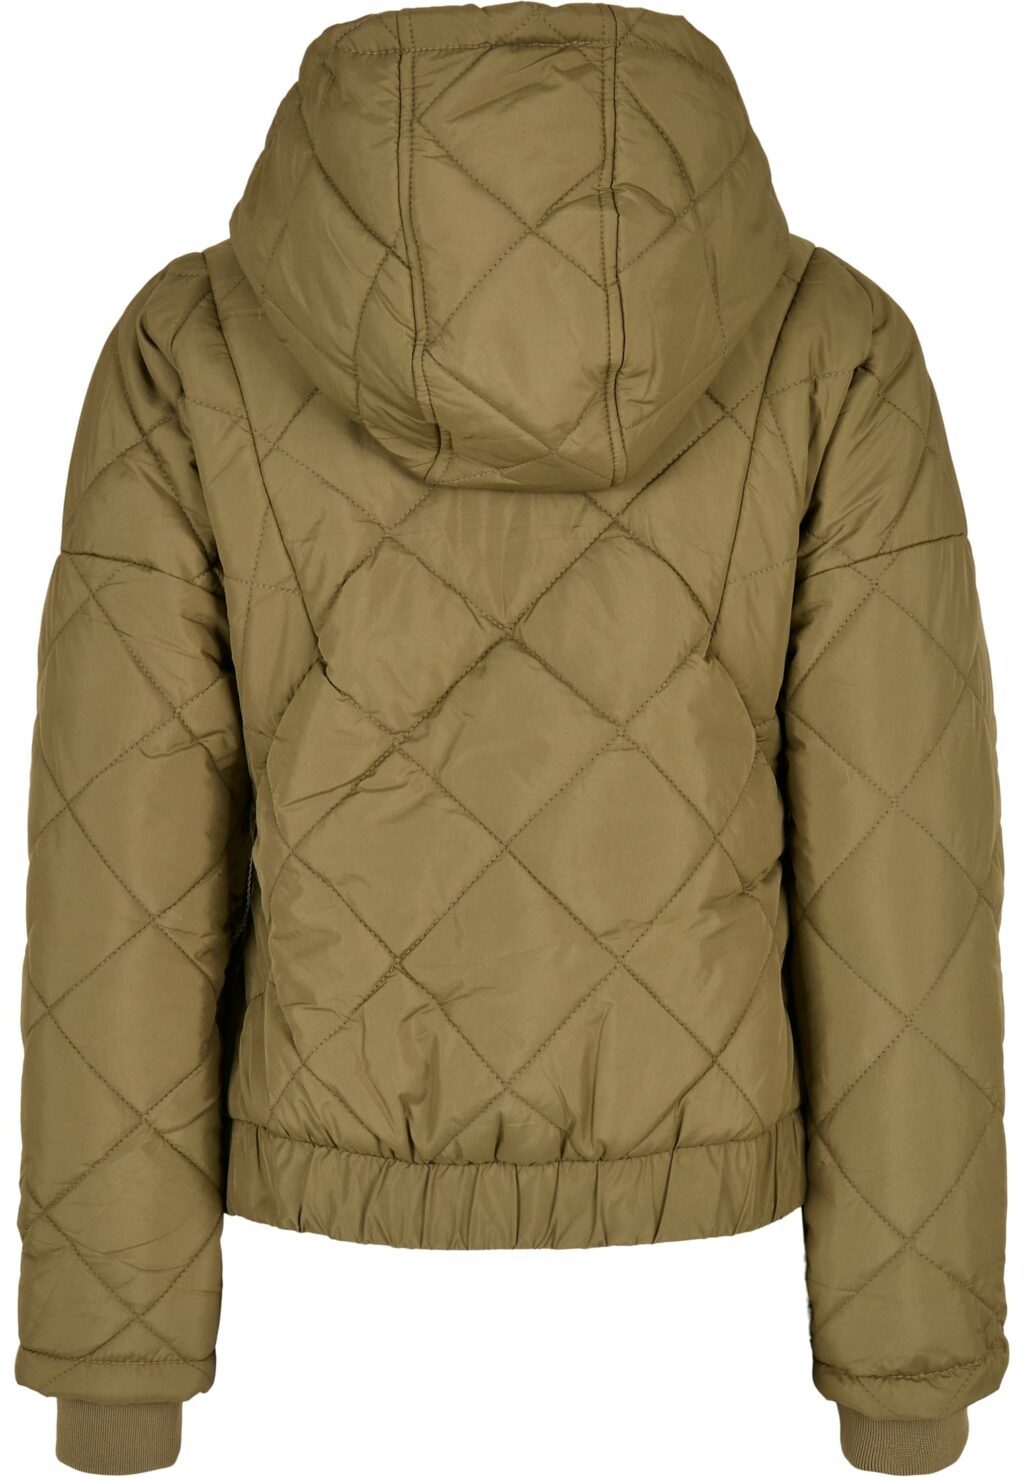 Urban Classics Ladies Oversized Diamond Quilted Pull Over Jacket tiniolive TB4555